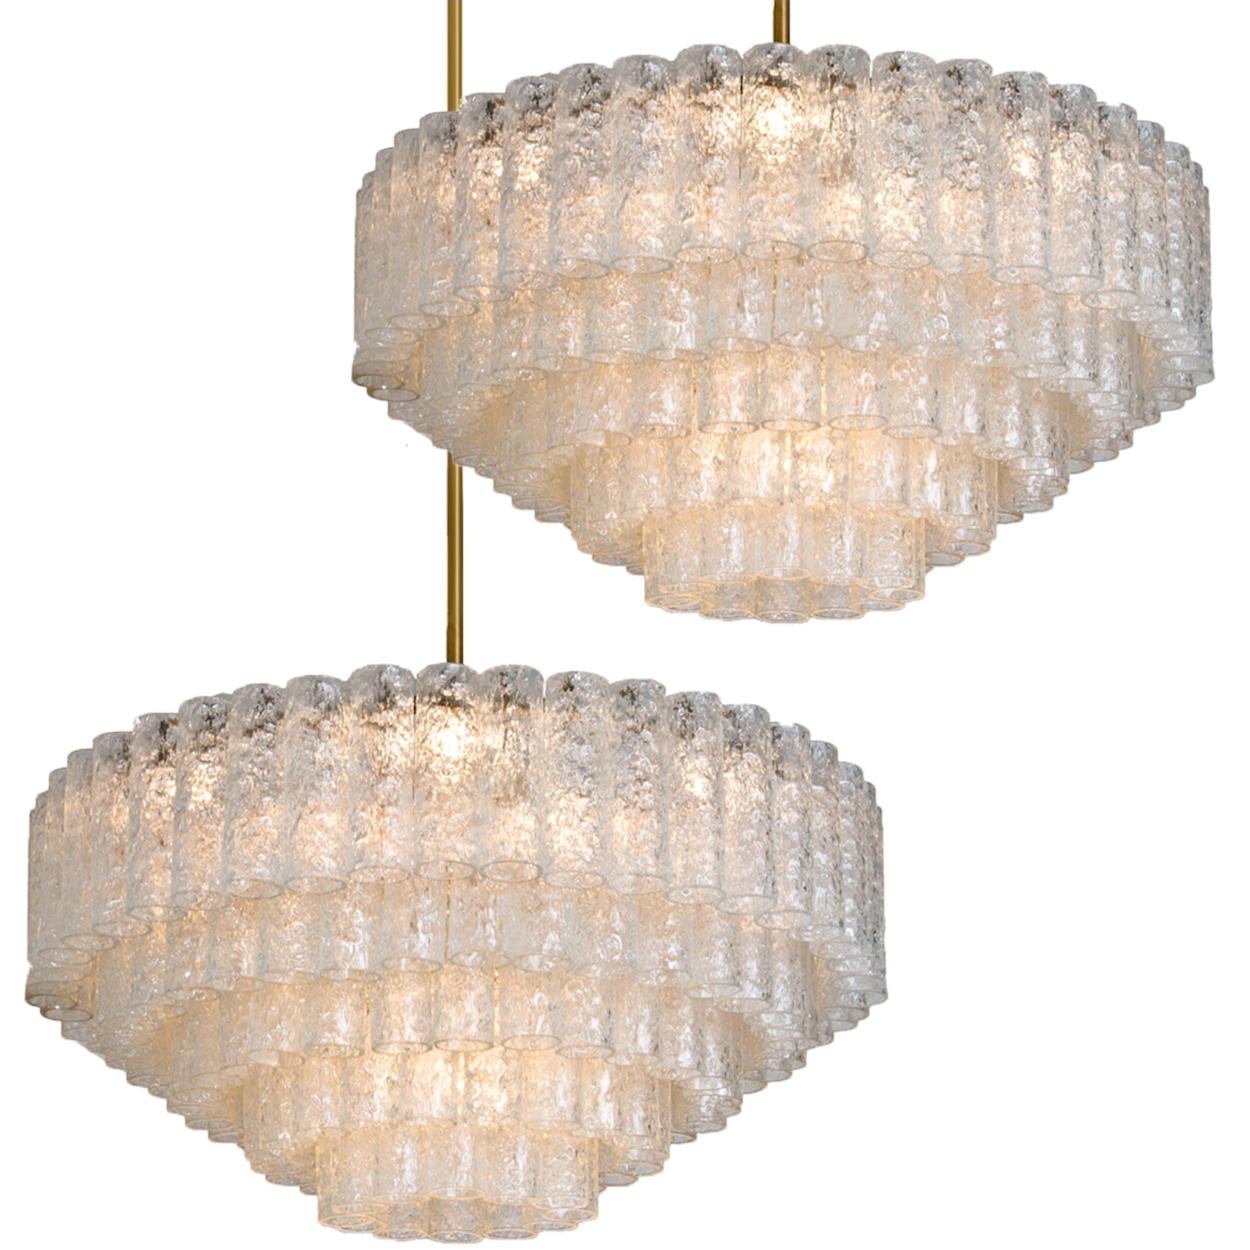 Pair of Doria Giant Ballroom Chandeliers Flush Mounts with 130 Blown Glass Tubes 12